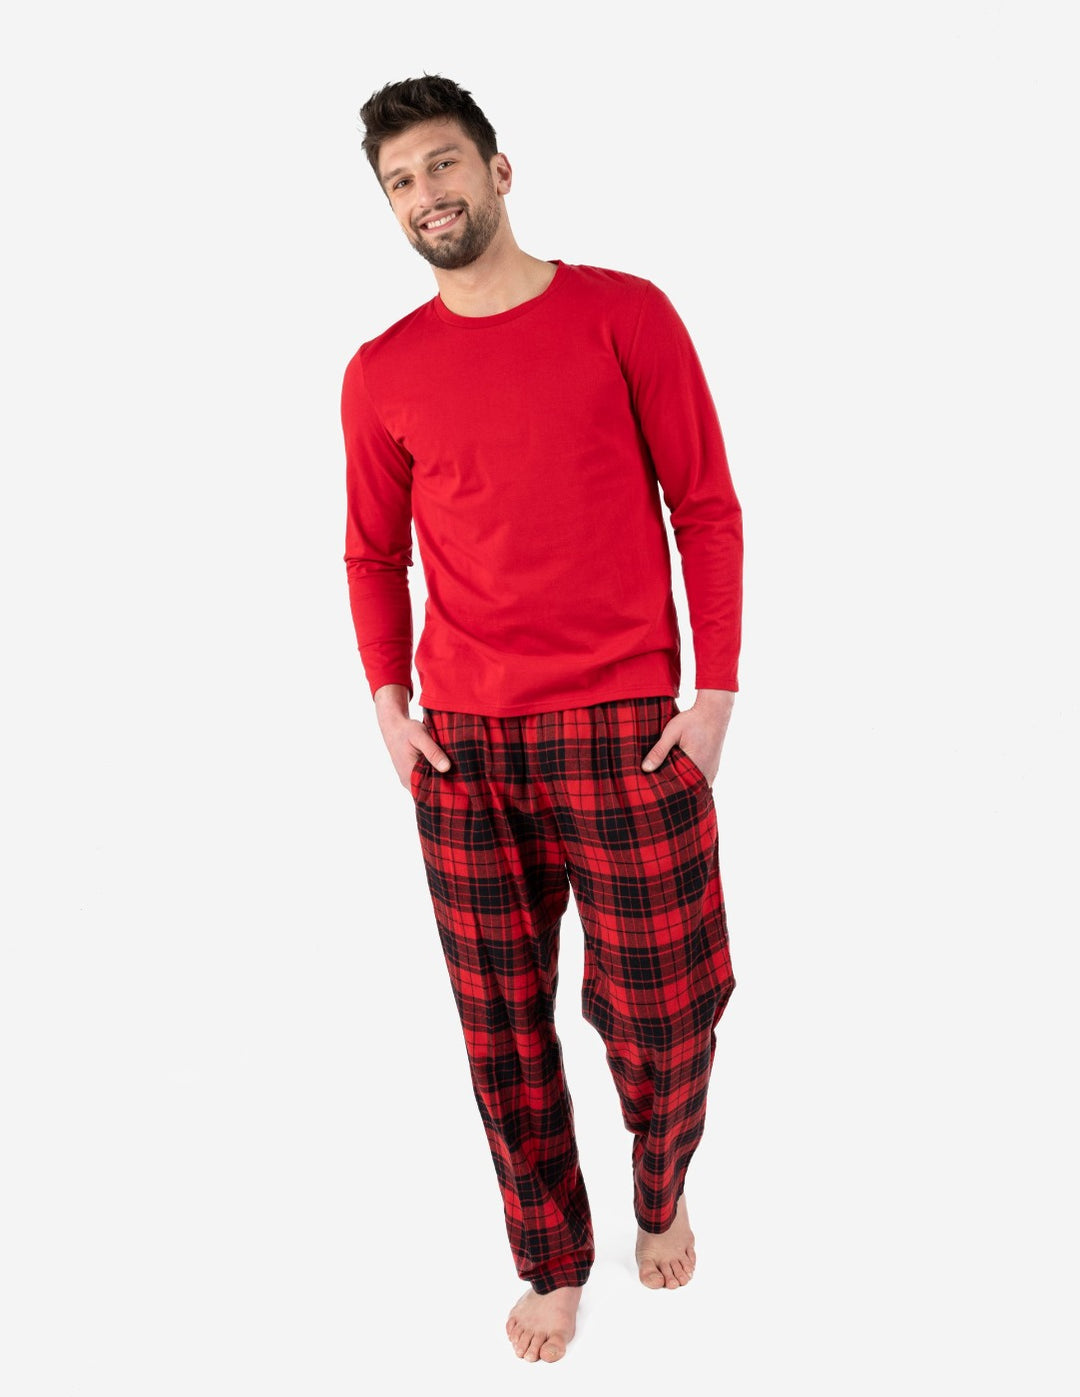 red and black plaid flannel and cotton men's pajama set